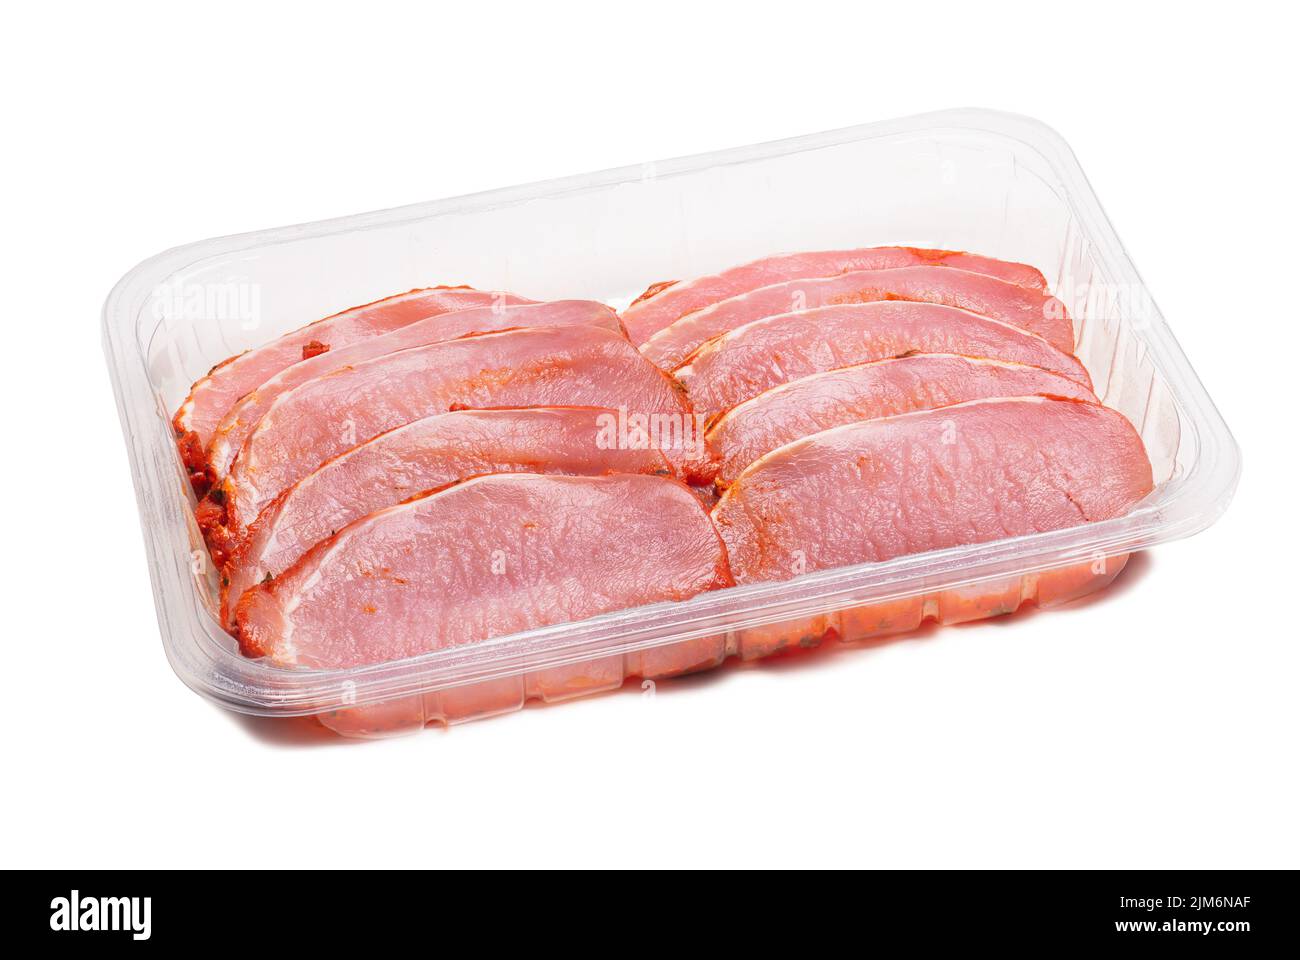 Marinated pork loin in plastic container isolated on white Stock Photo